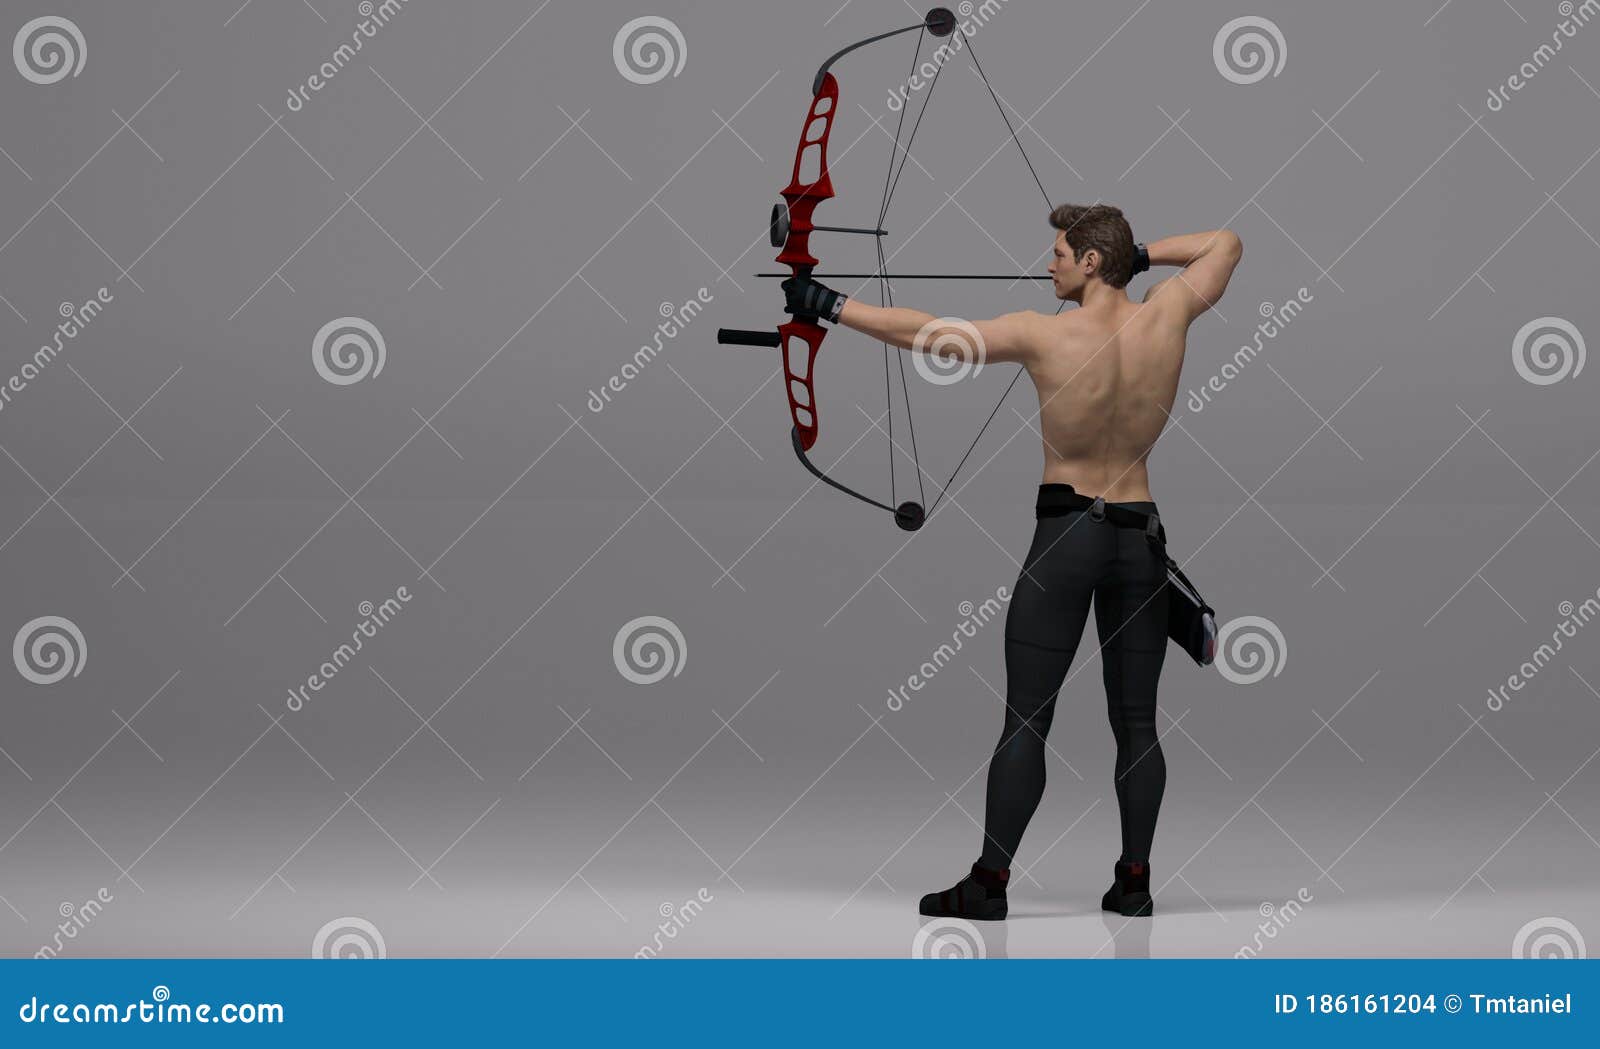 Female Archery With Bow And Arrow In Aiming Pose Background, Female Archer,  Archery, Archery Sports Background Image And Wallpaper for Free Download